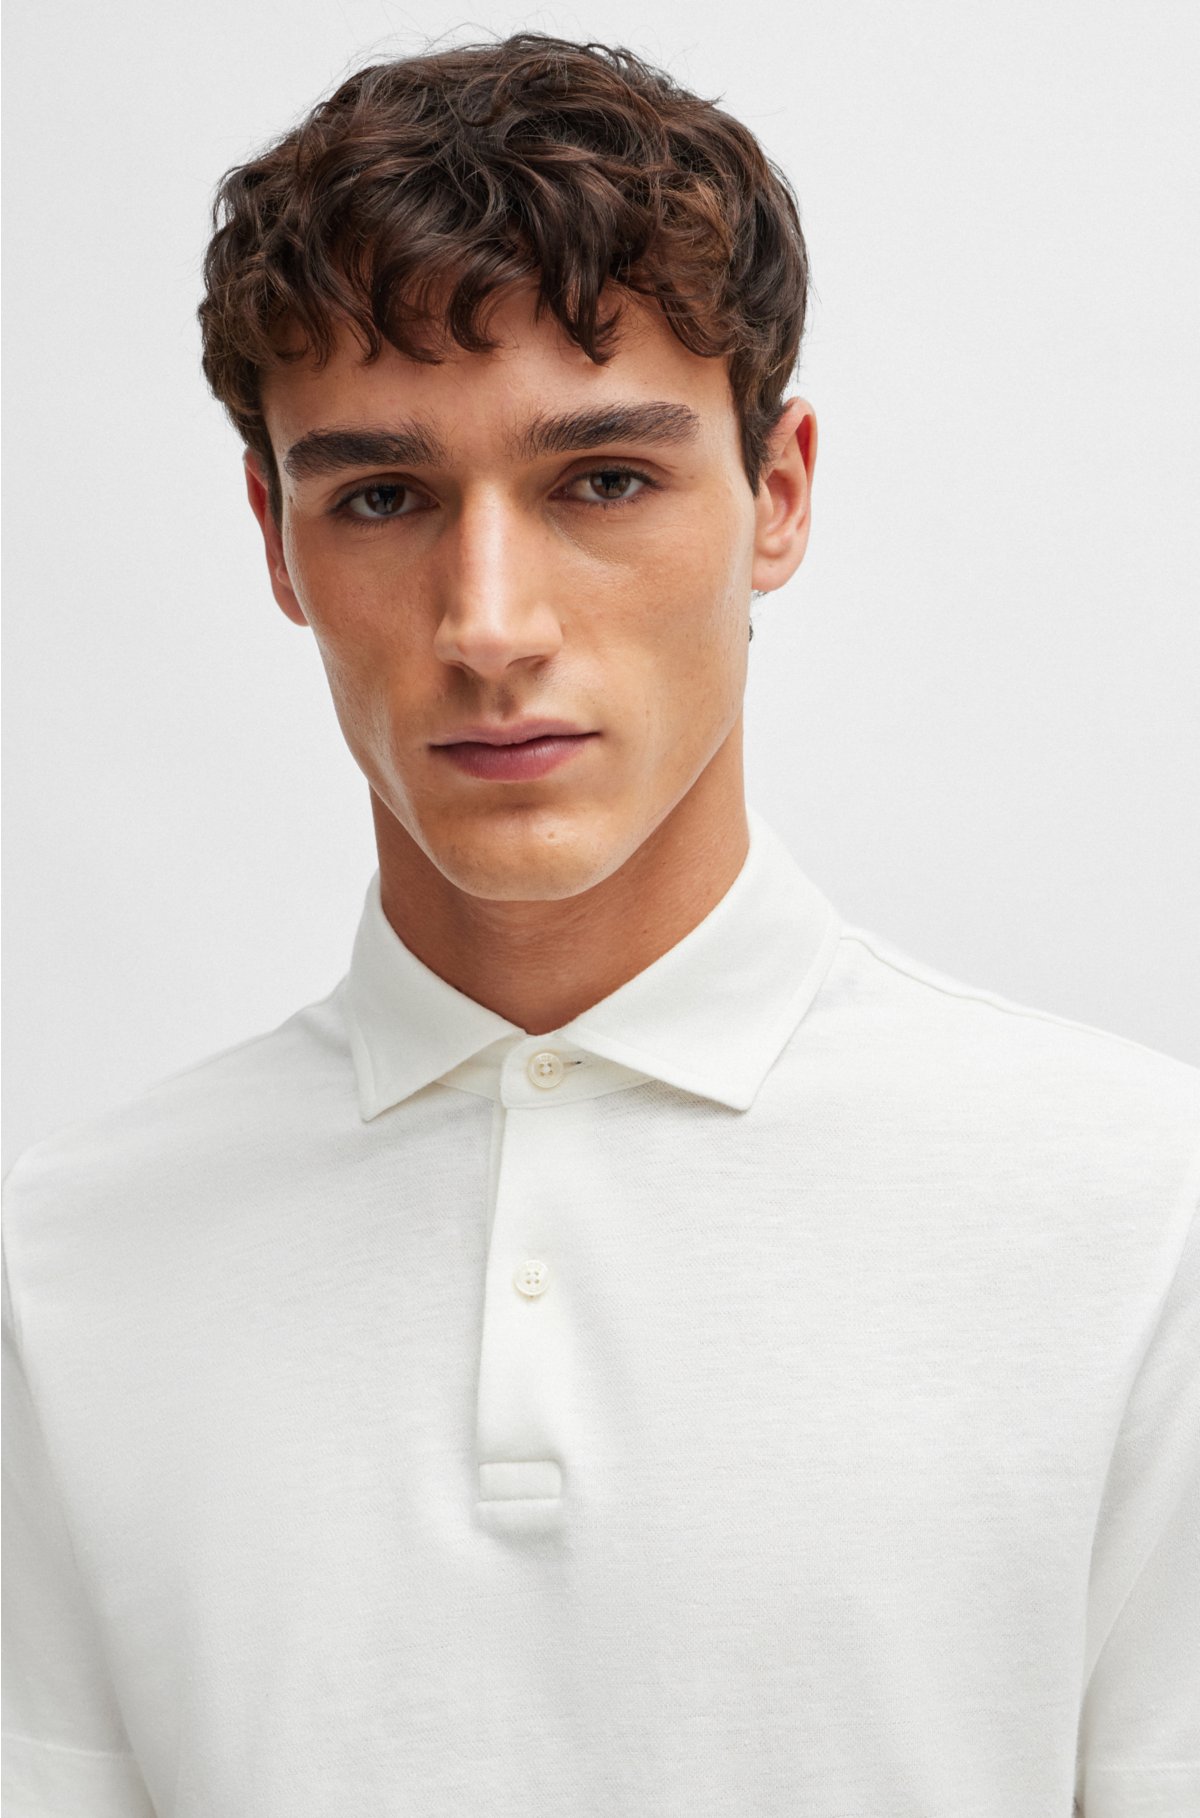 Regular-fit polo shirt in cotton and linen, White